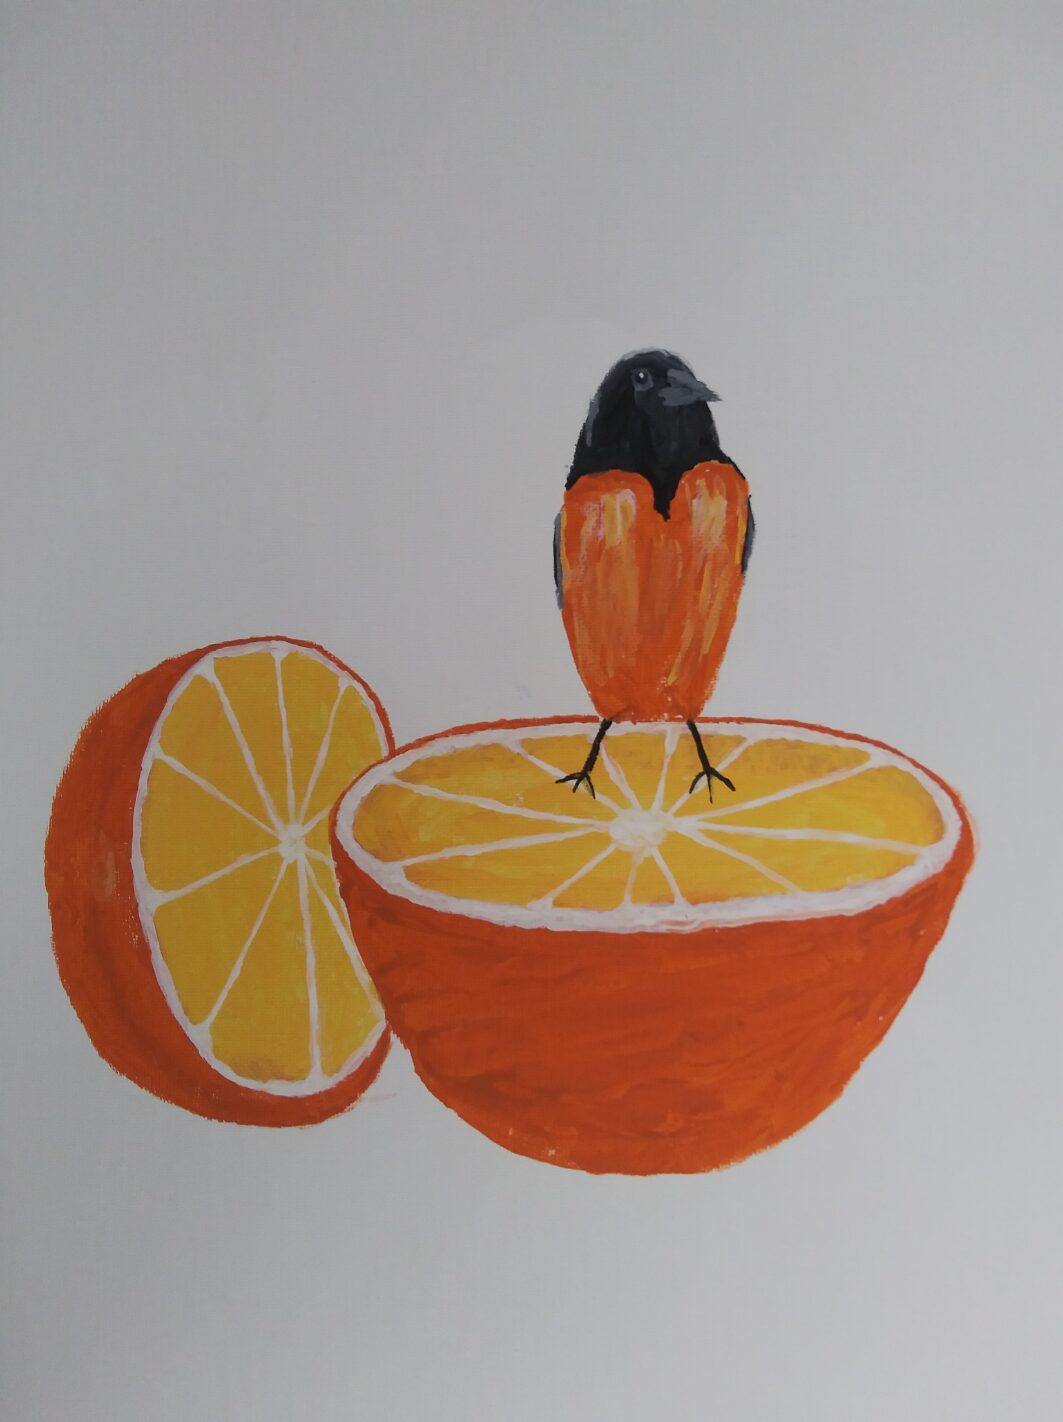 "Baltimore Orioles Eating Oranges" by Katherine Scobey